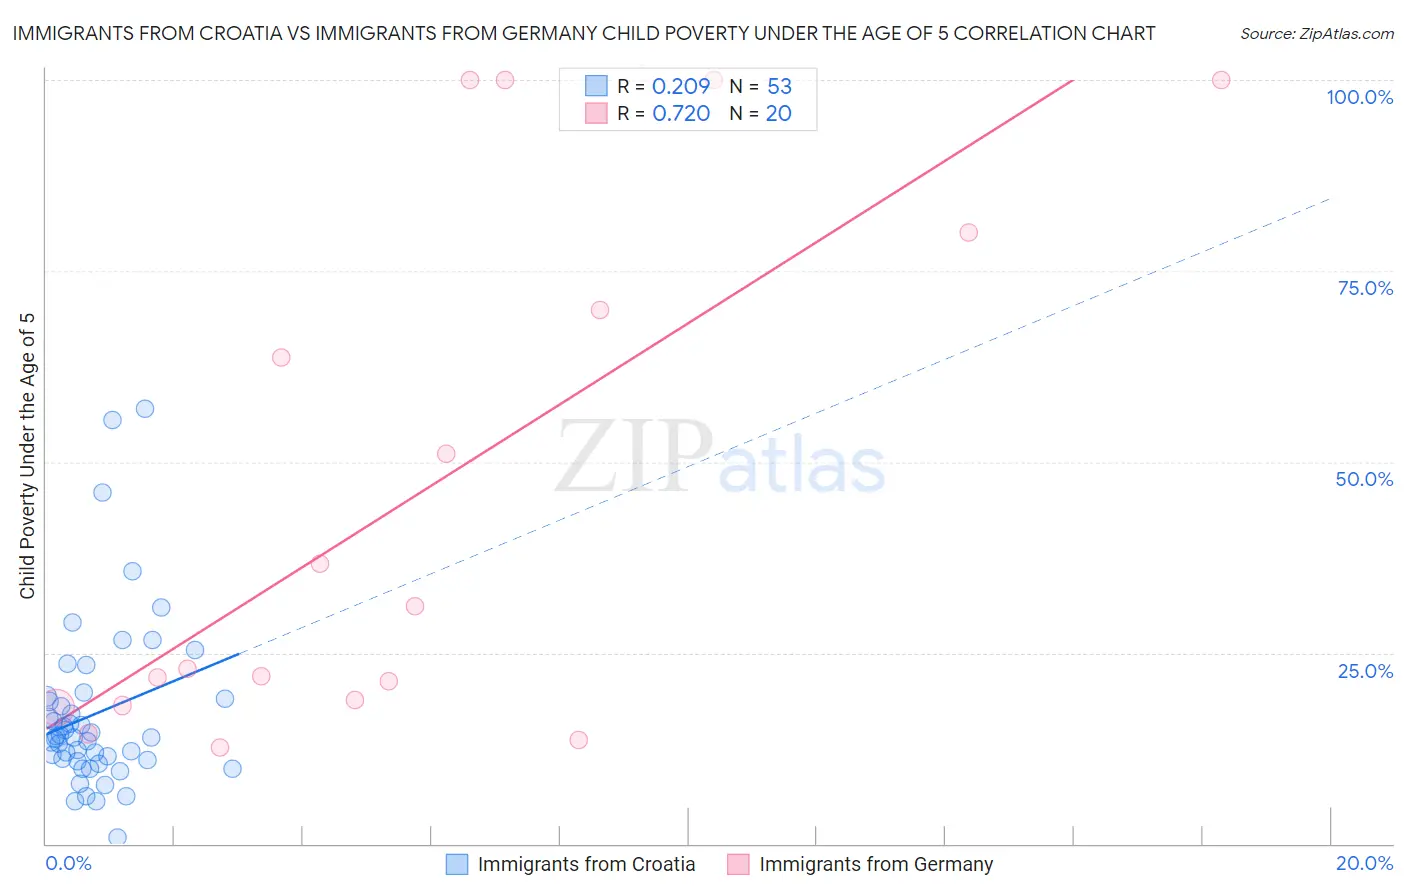 Immigrants from Croatia vs Immigrants from Germany Child Poverty Under the Age of 5